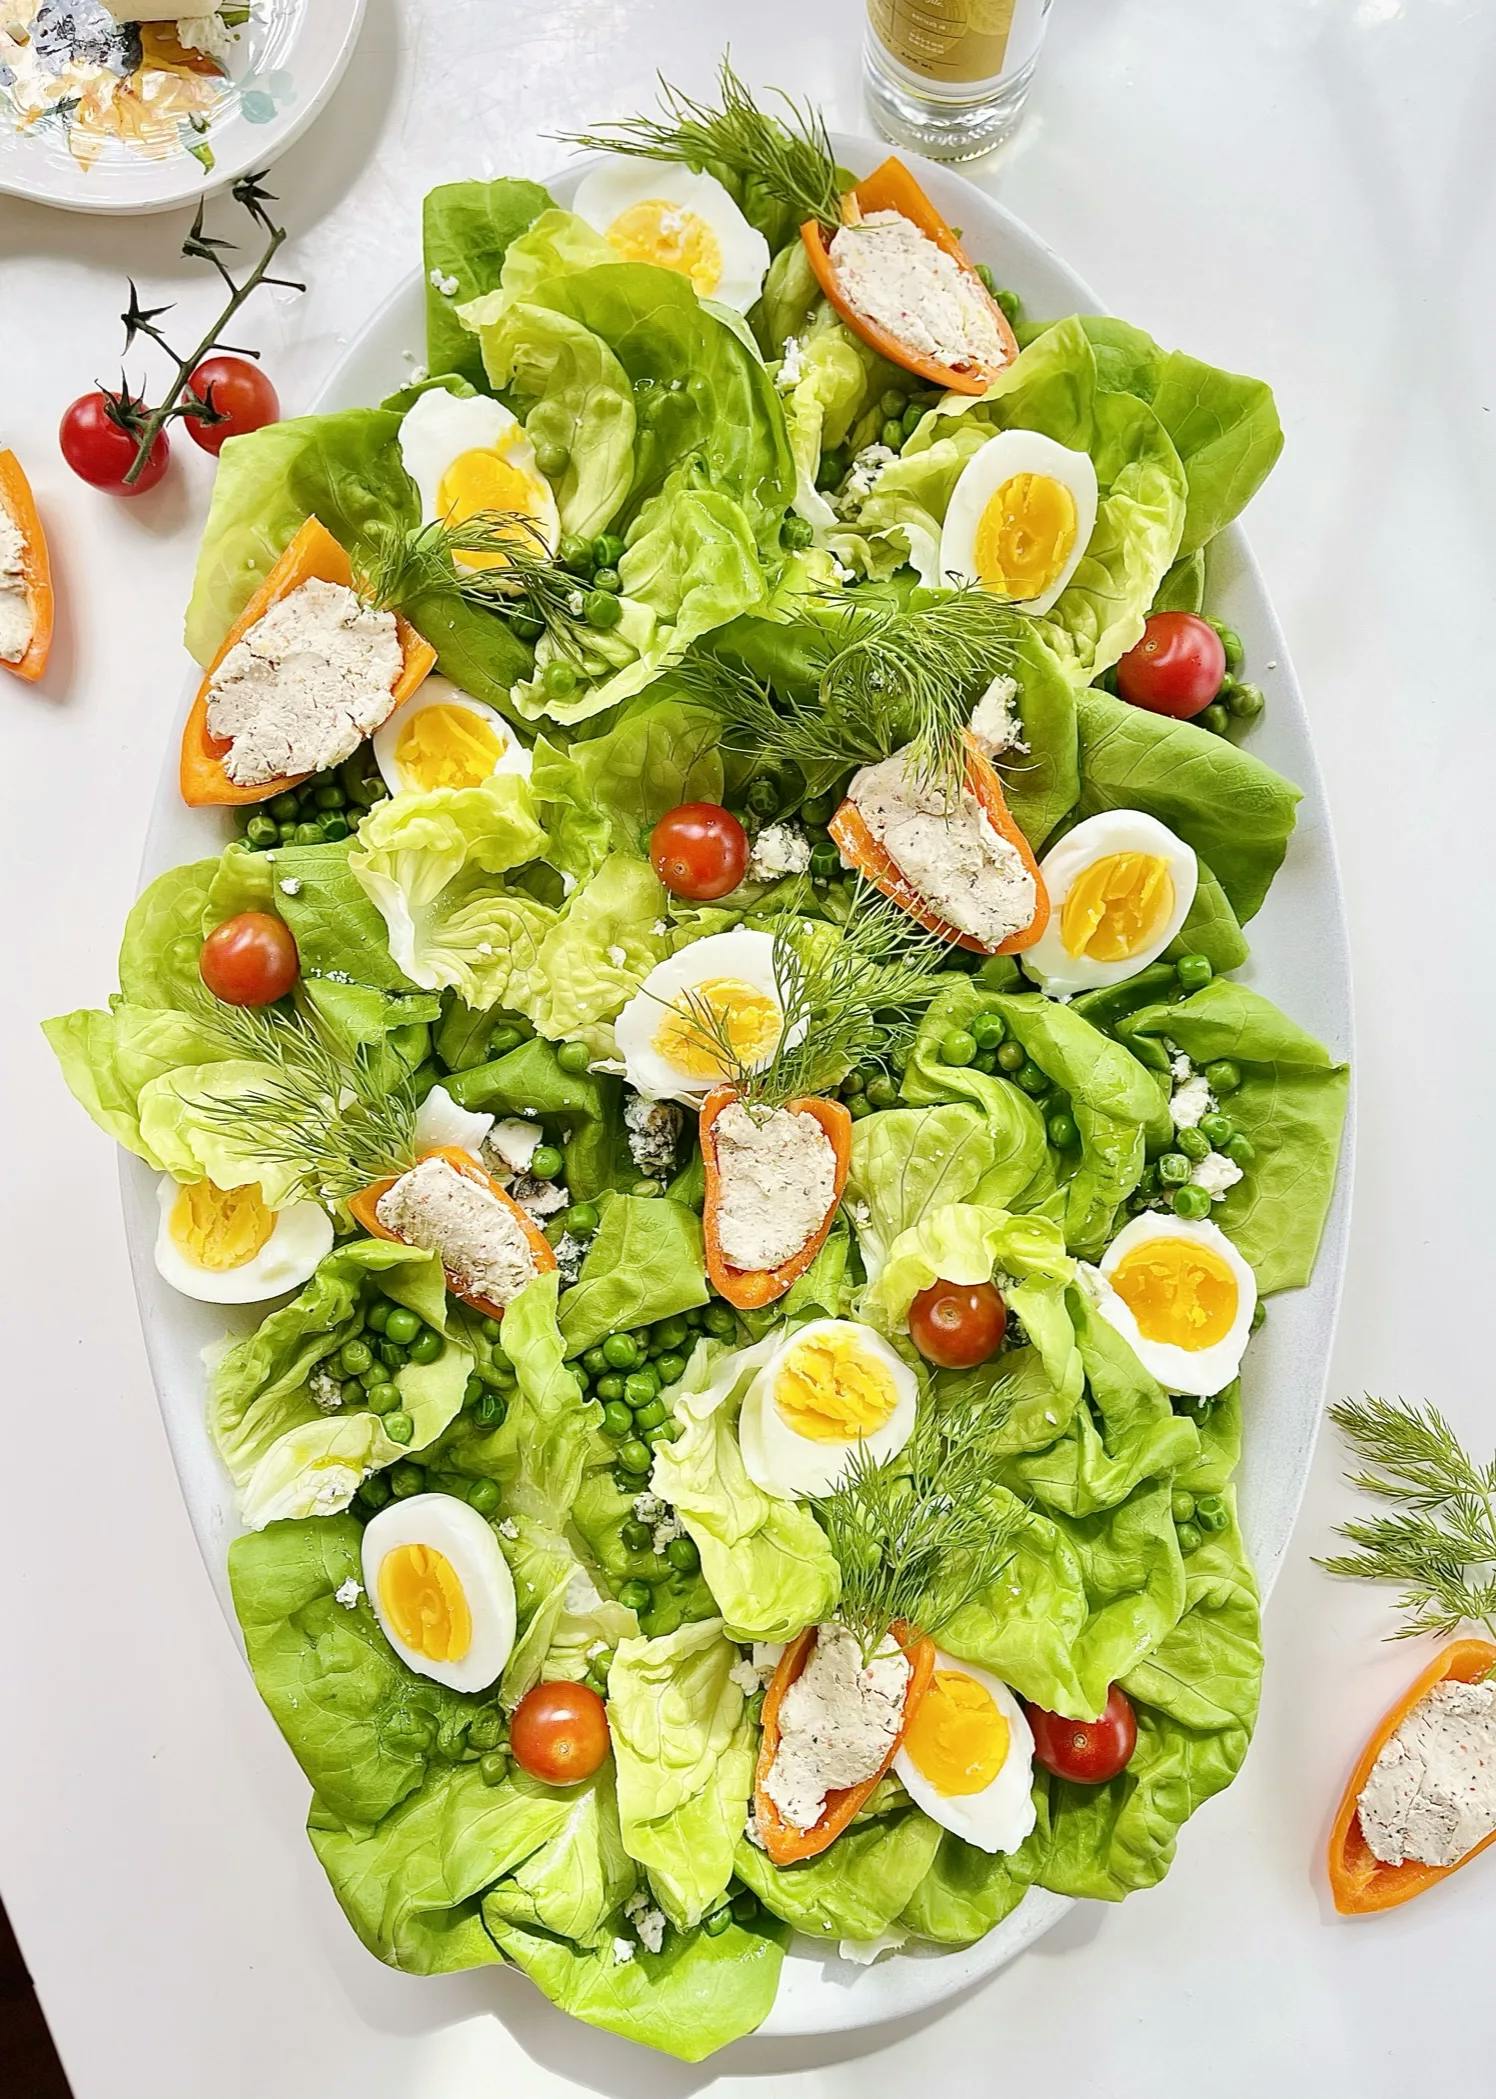 Picture for Butter Lettuce "Carrot" Peppers Easter Vegetarian Cobb Salad